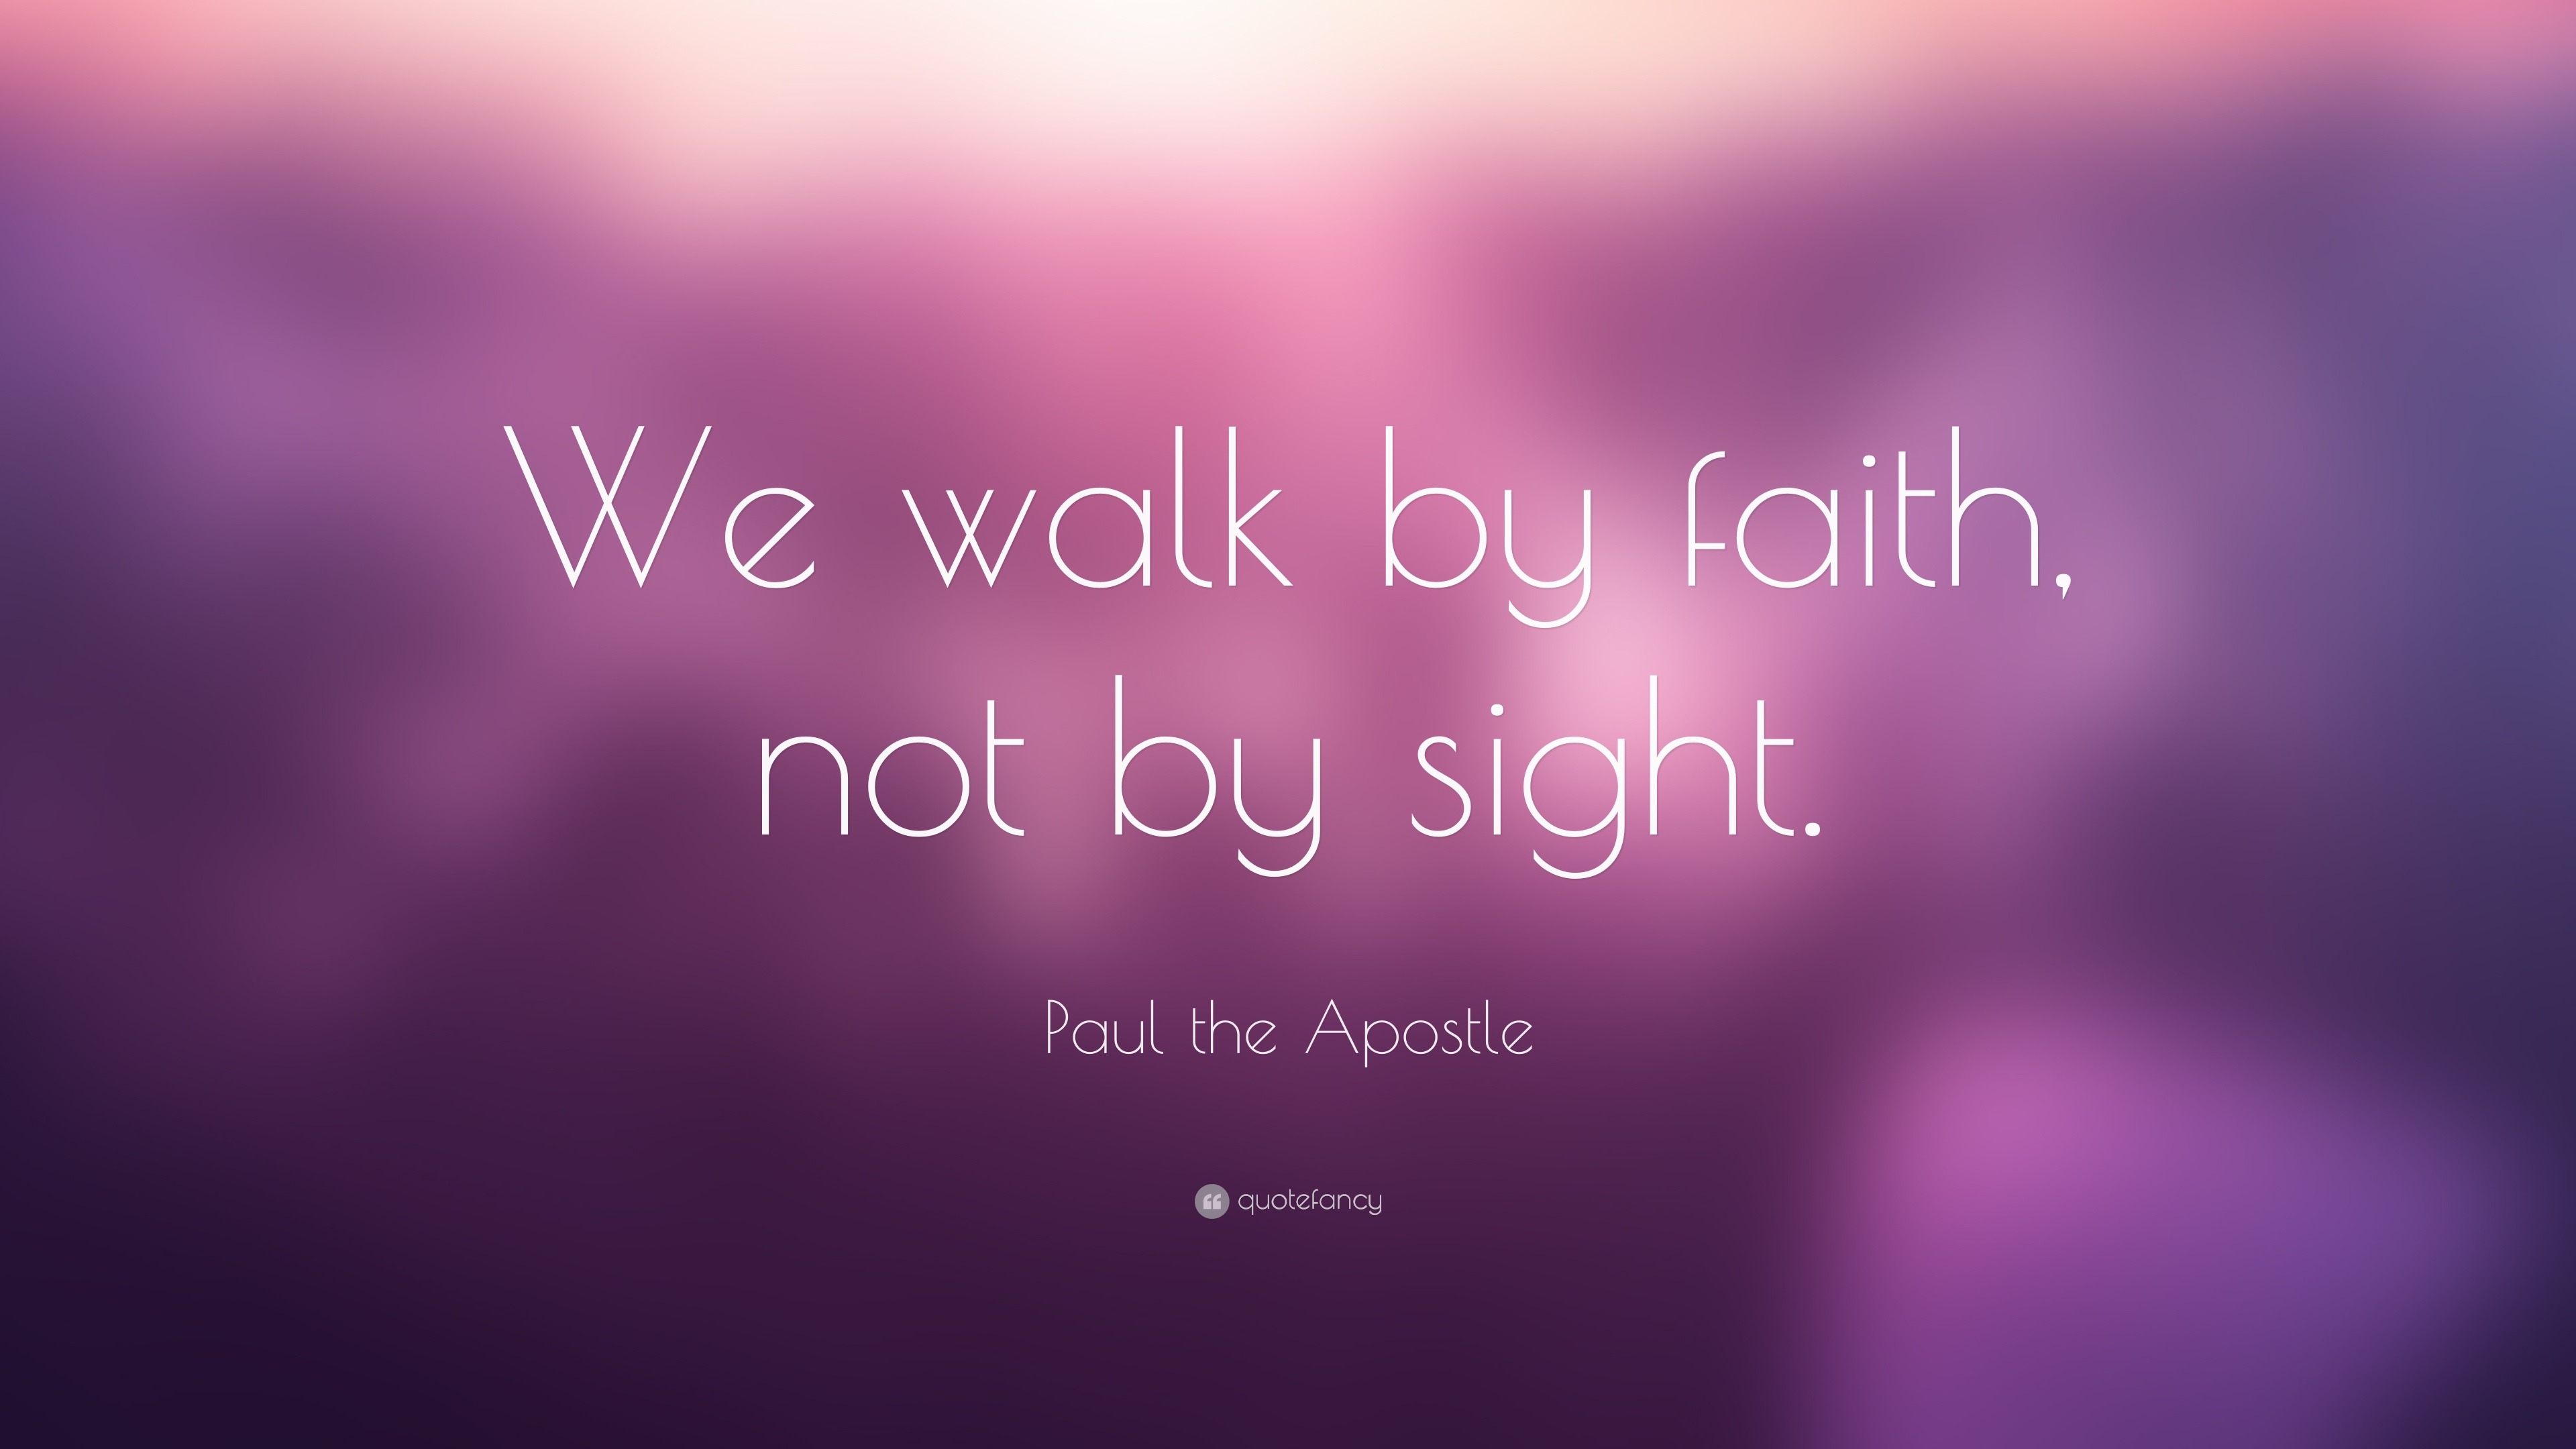 Paul the Apostle Quote: “We walk by faith, not by sight.” (12